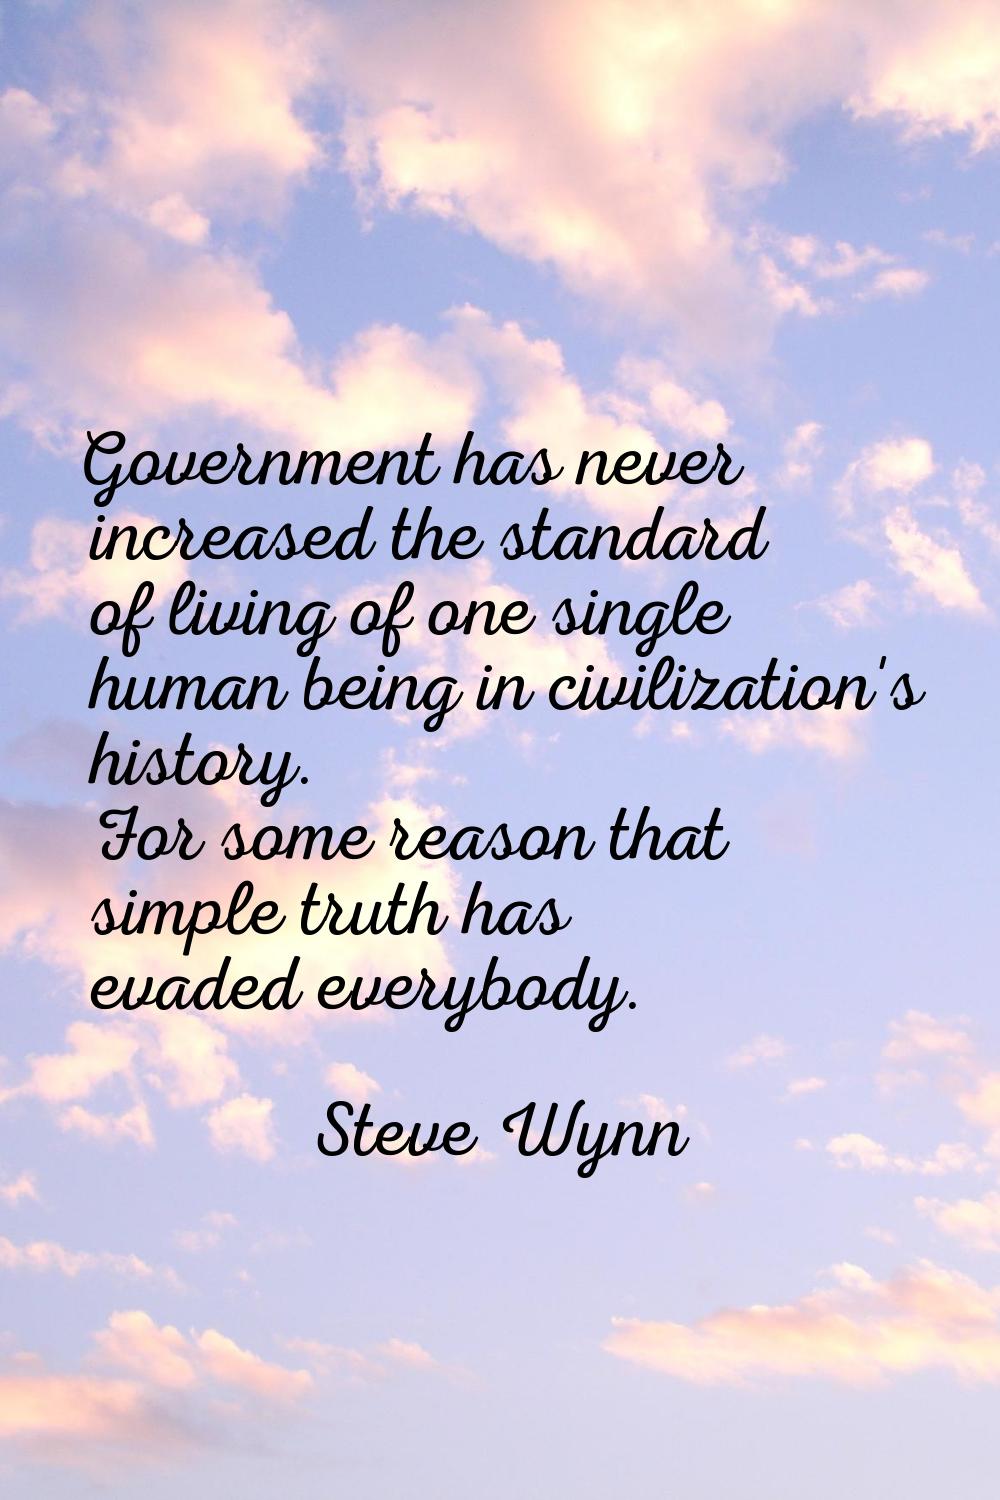 Government has never increased the standard of living of one single human being in civilization's h